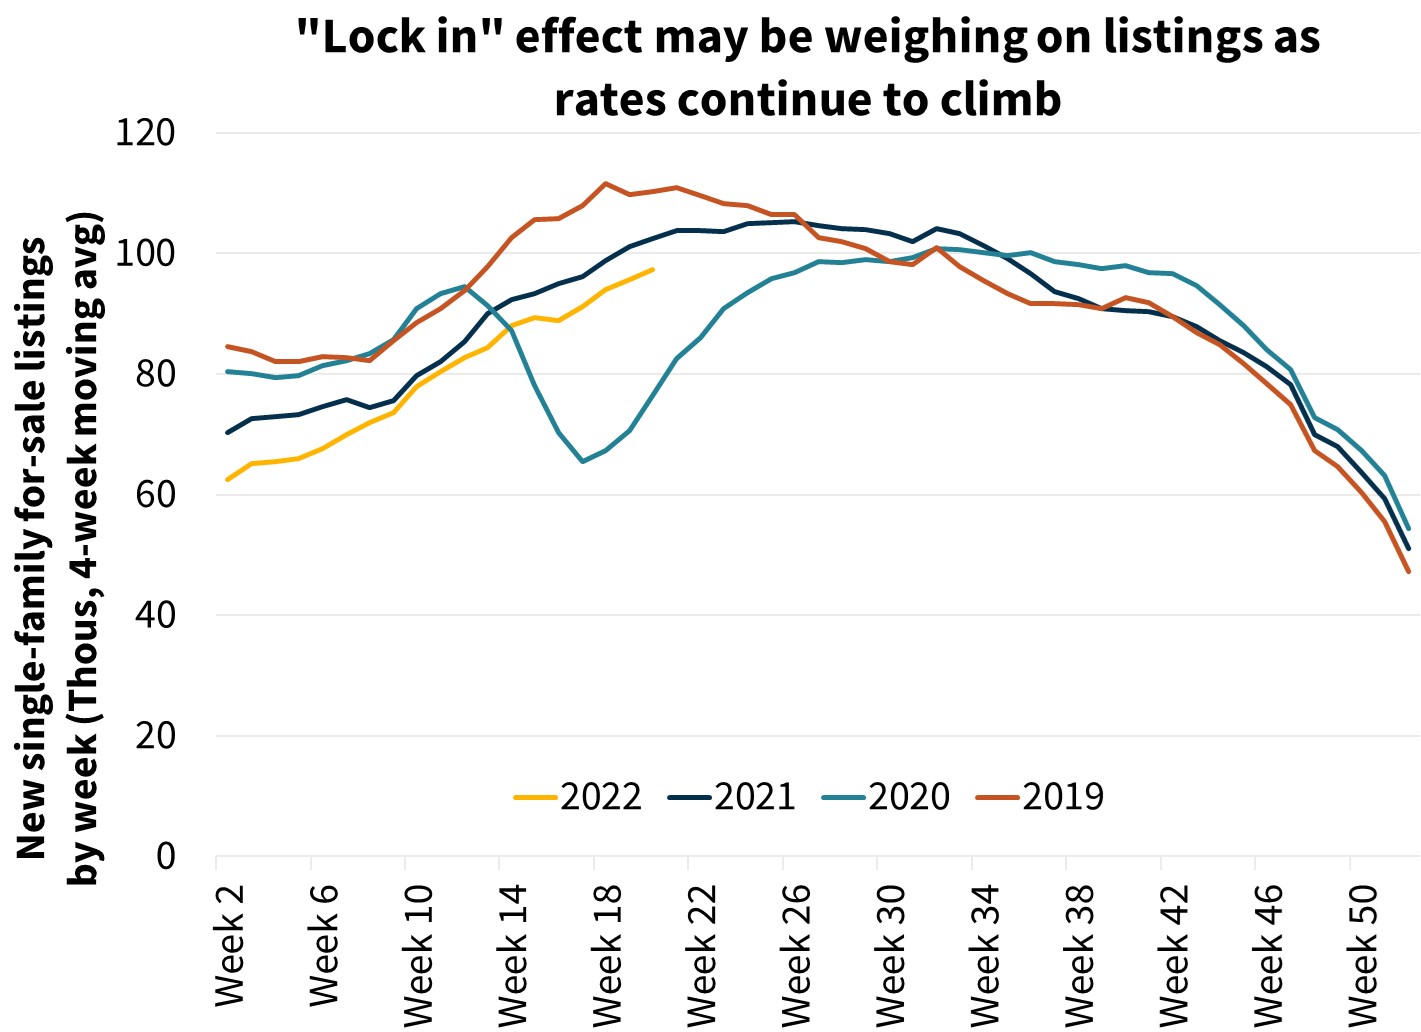  Lock in effect may be weighing on listings as rates continue to climb 